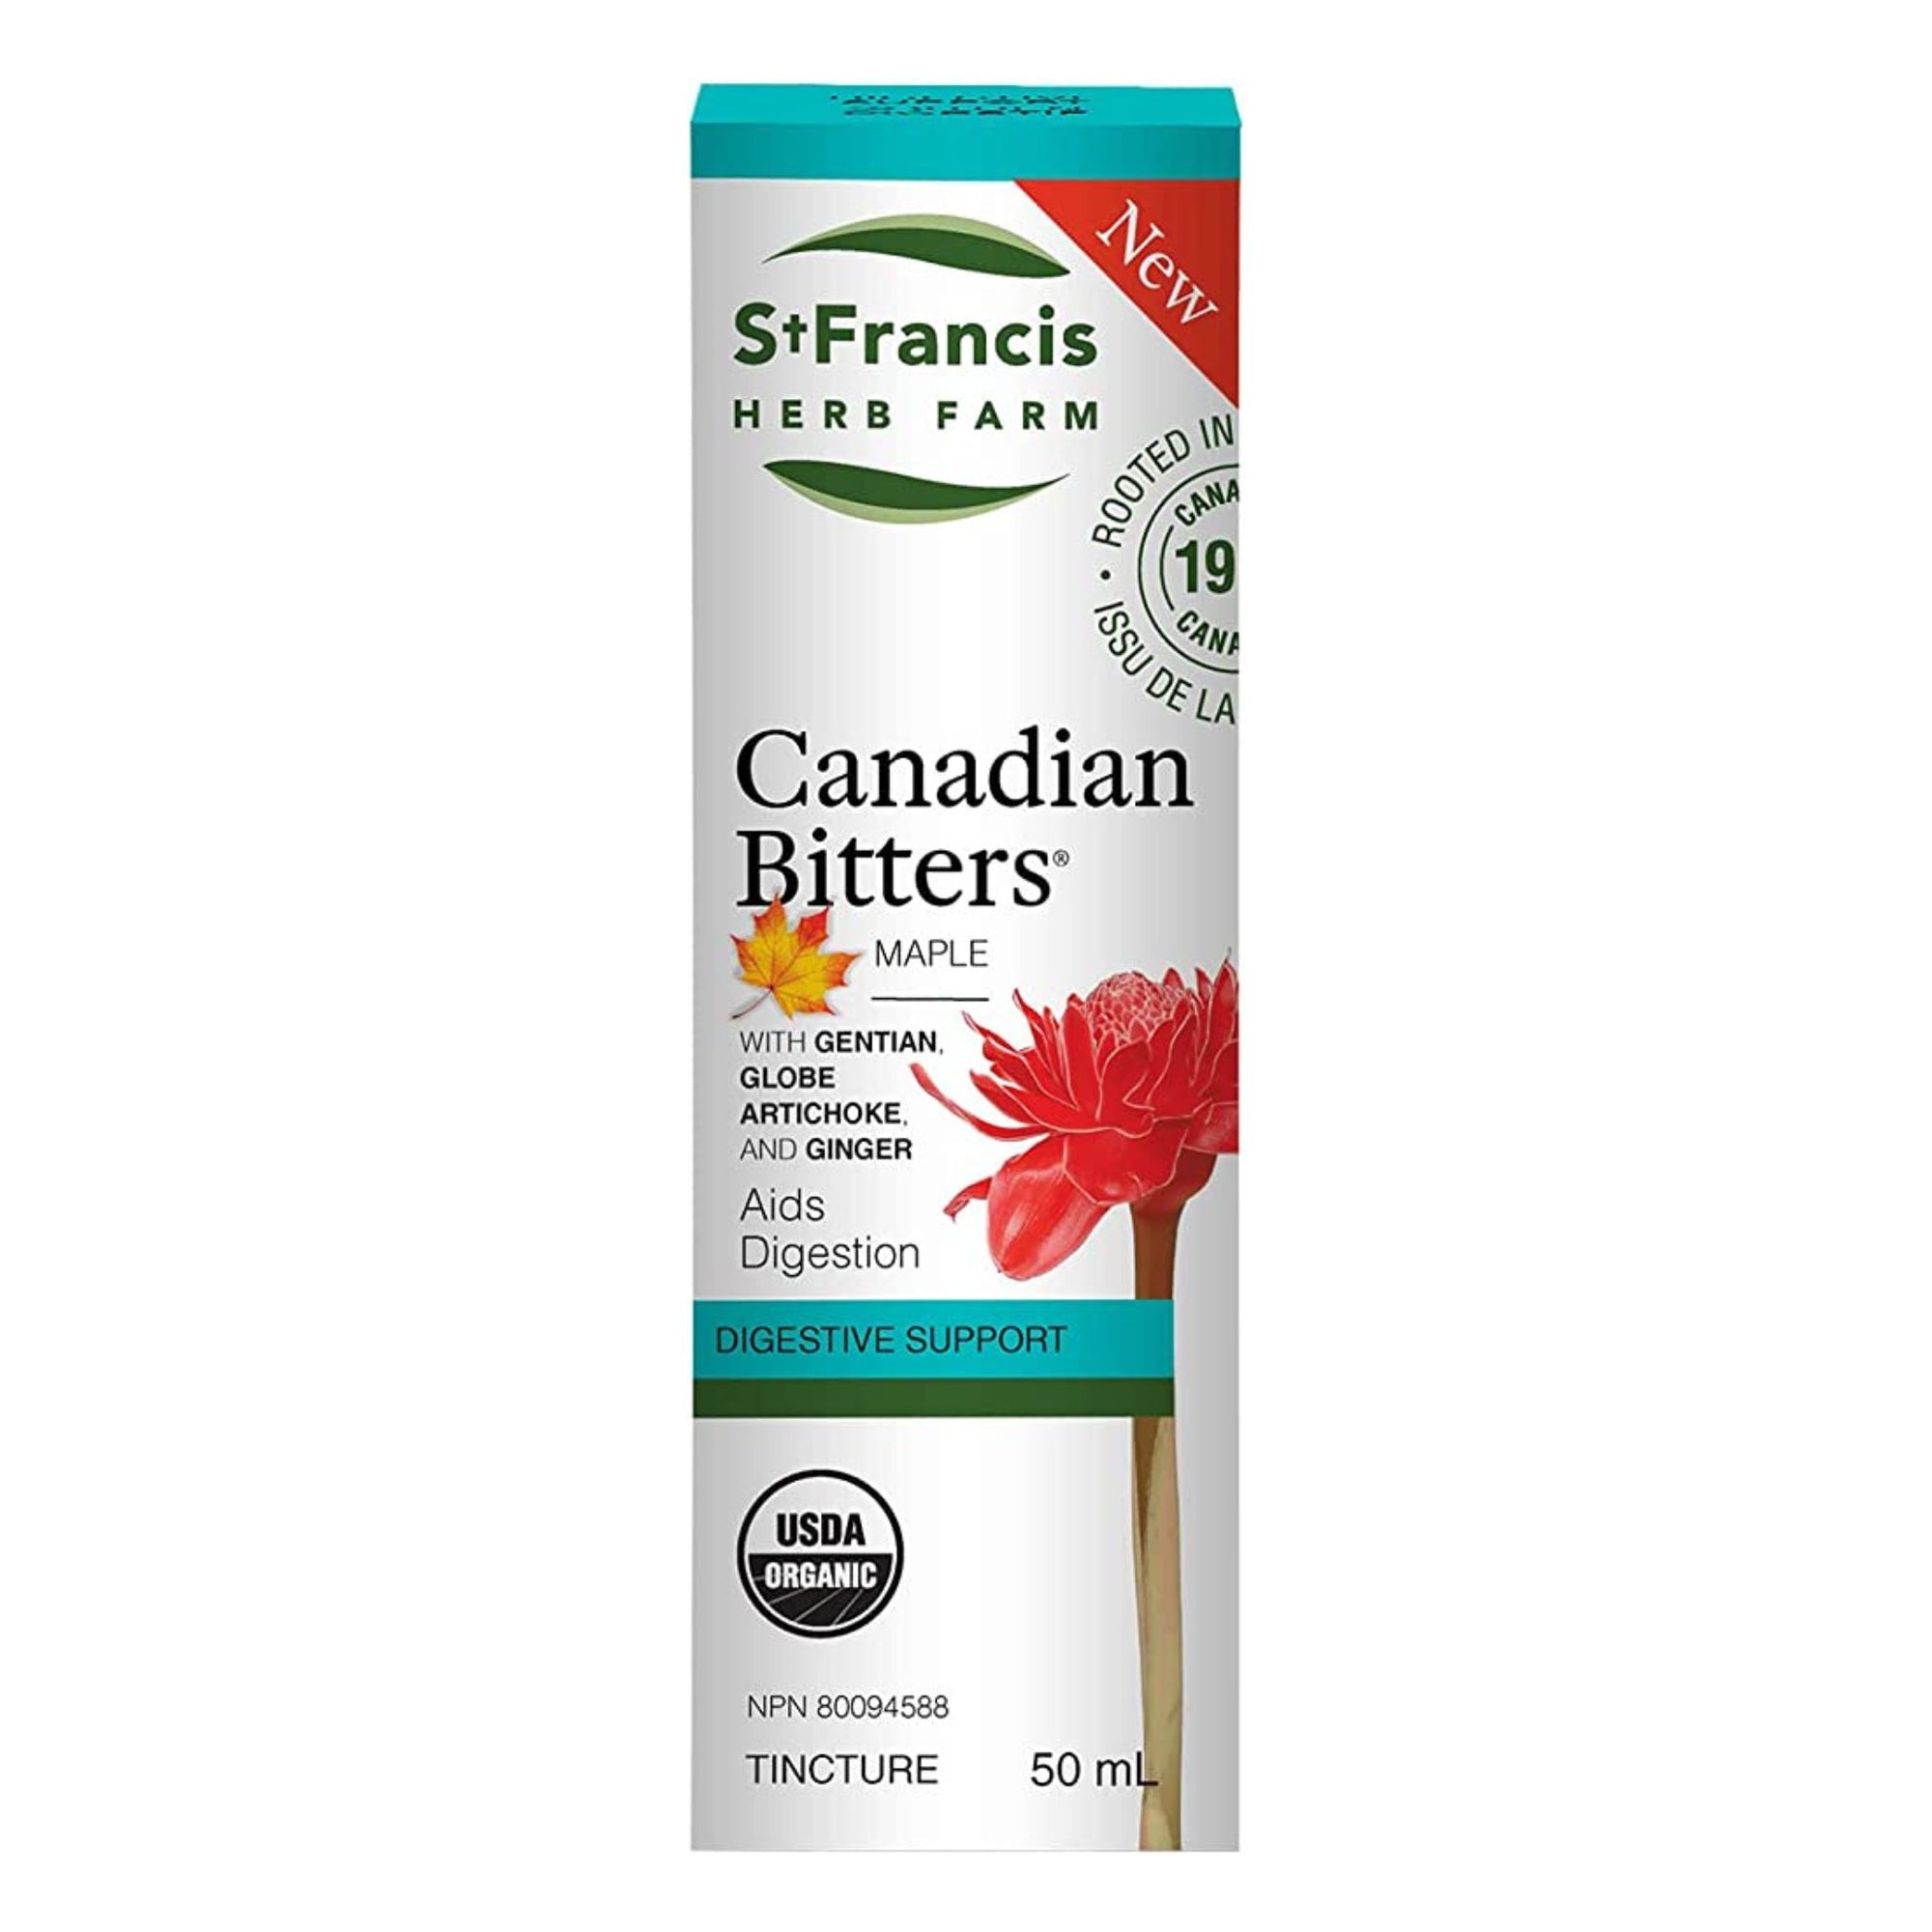 St. Francis Canadian Bitters Maple 100ml